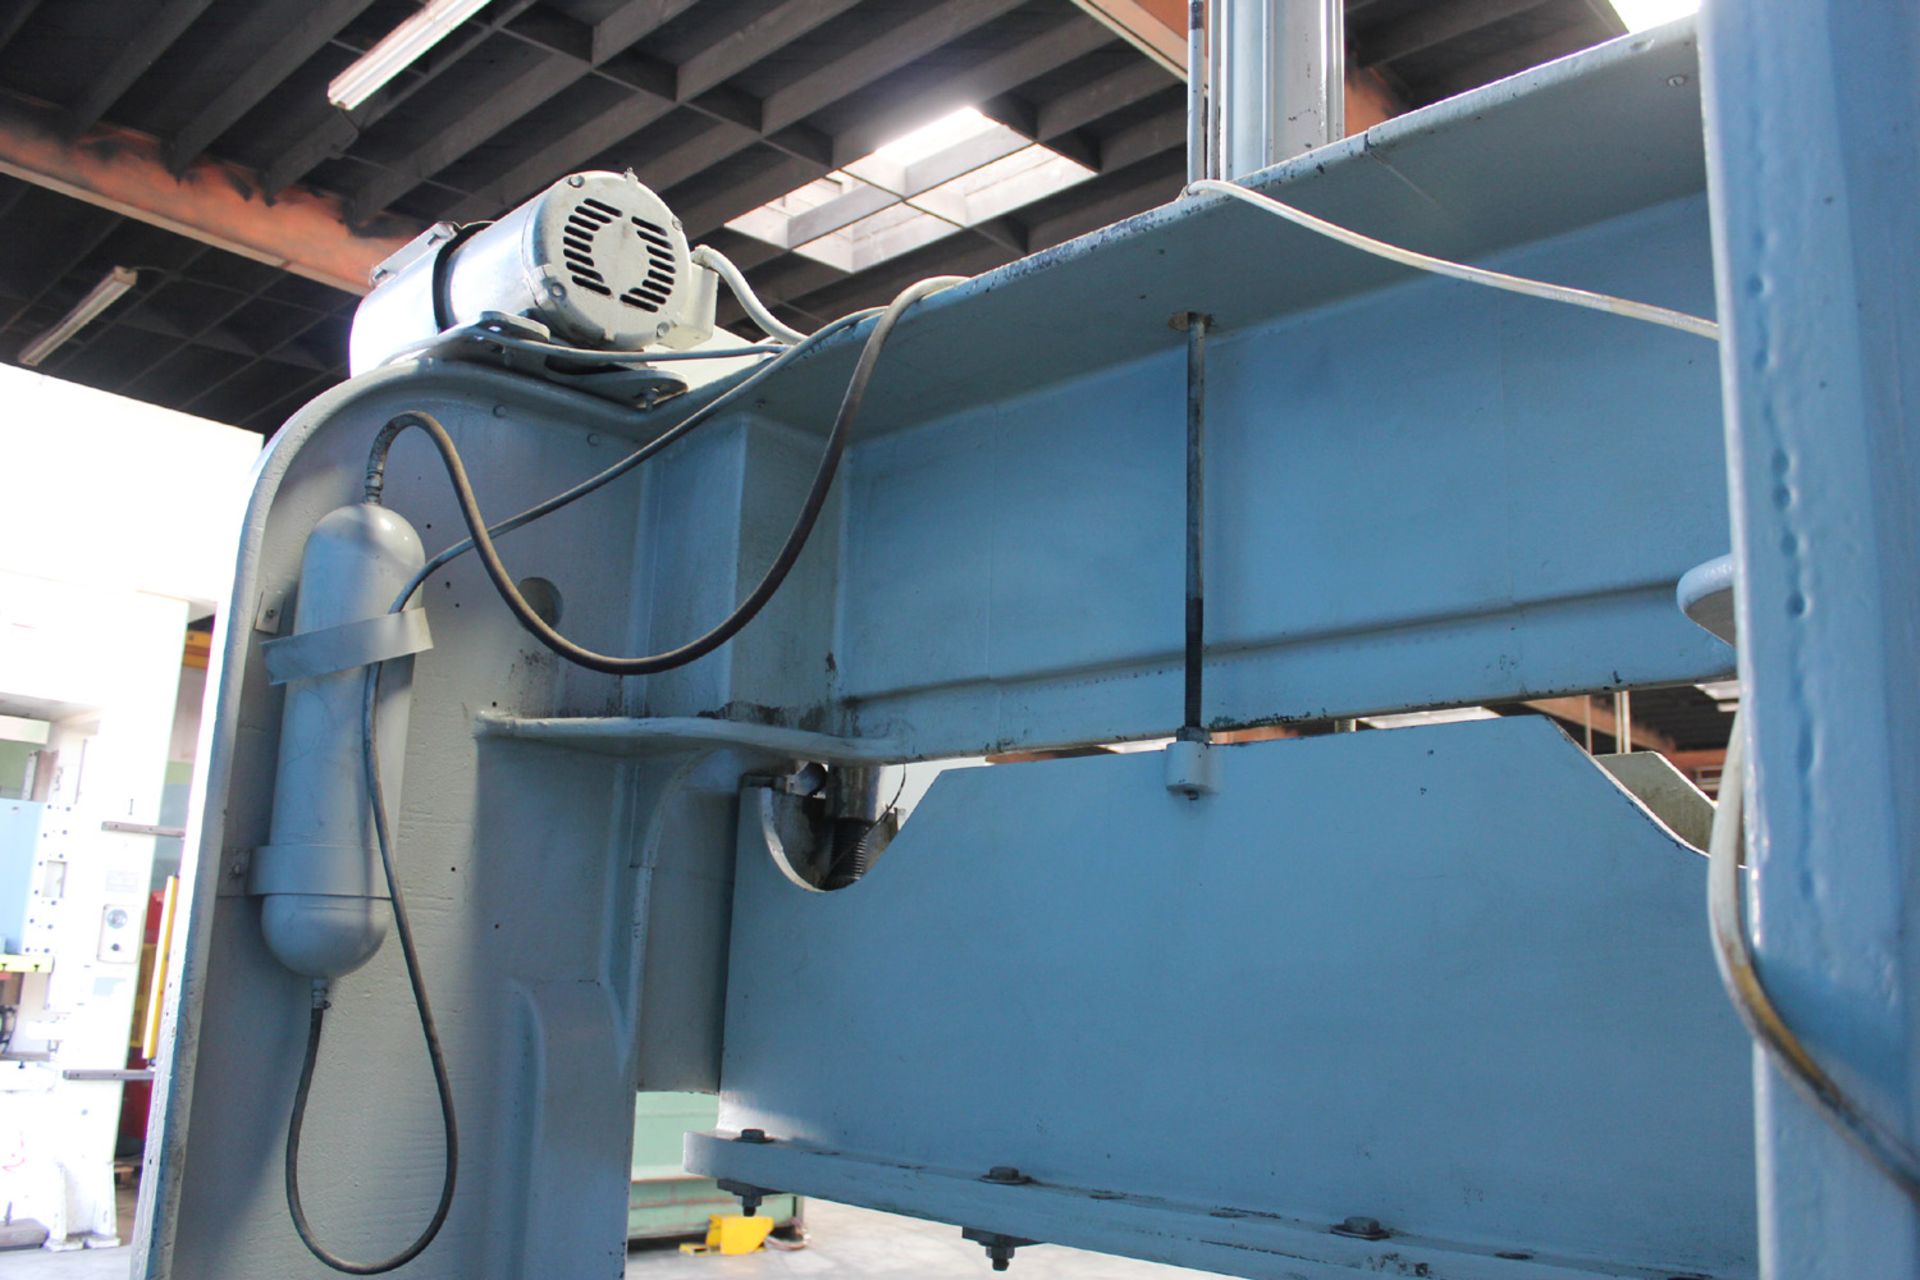 60-Ton x 76" x 18" Rousselle Gap Frame SSDC Punch Press - Located In: Huntington Park, CA - Image 8 of 10